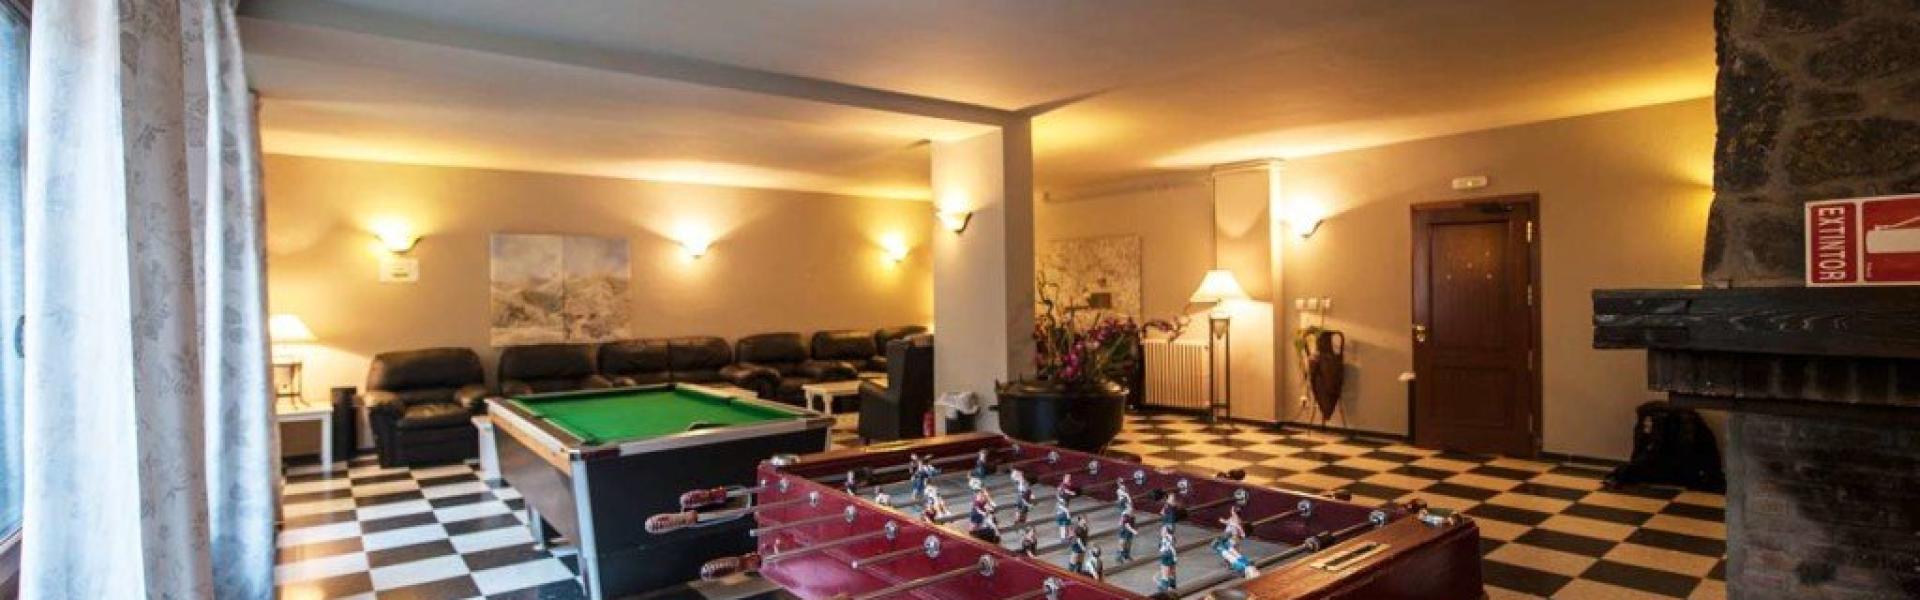 Discover all the details of the Hotel El Pradet